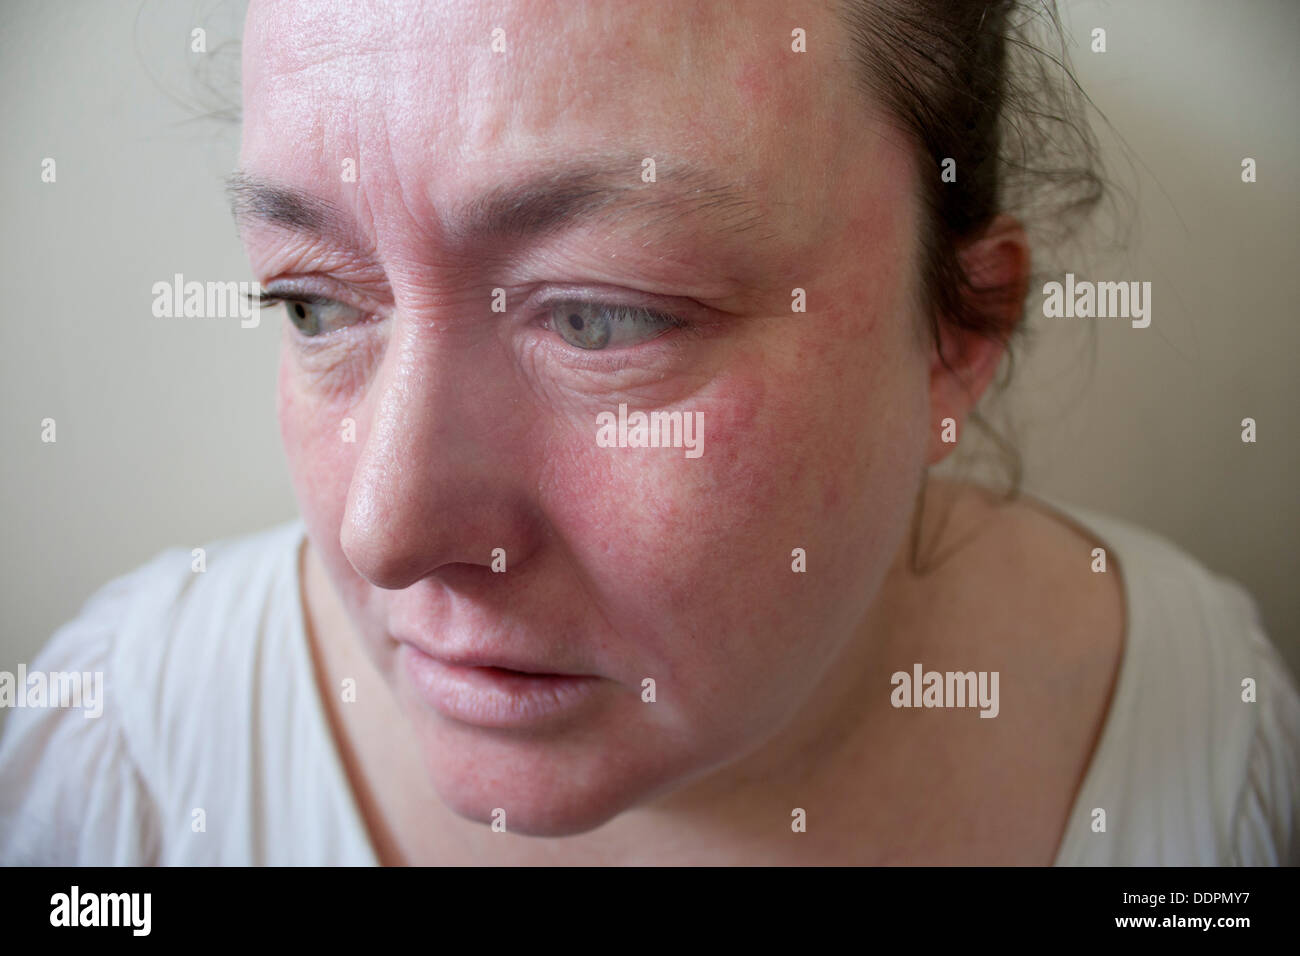 Woman with severe eczema allergic reaction on face Model Released Stock Photo